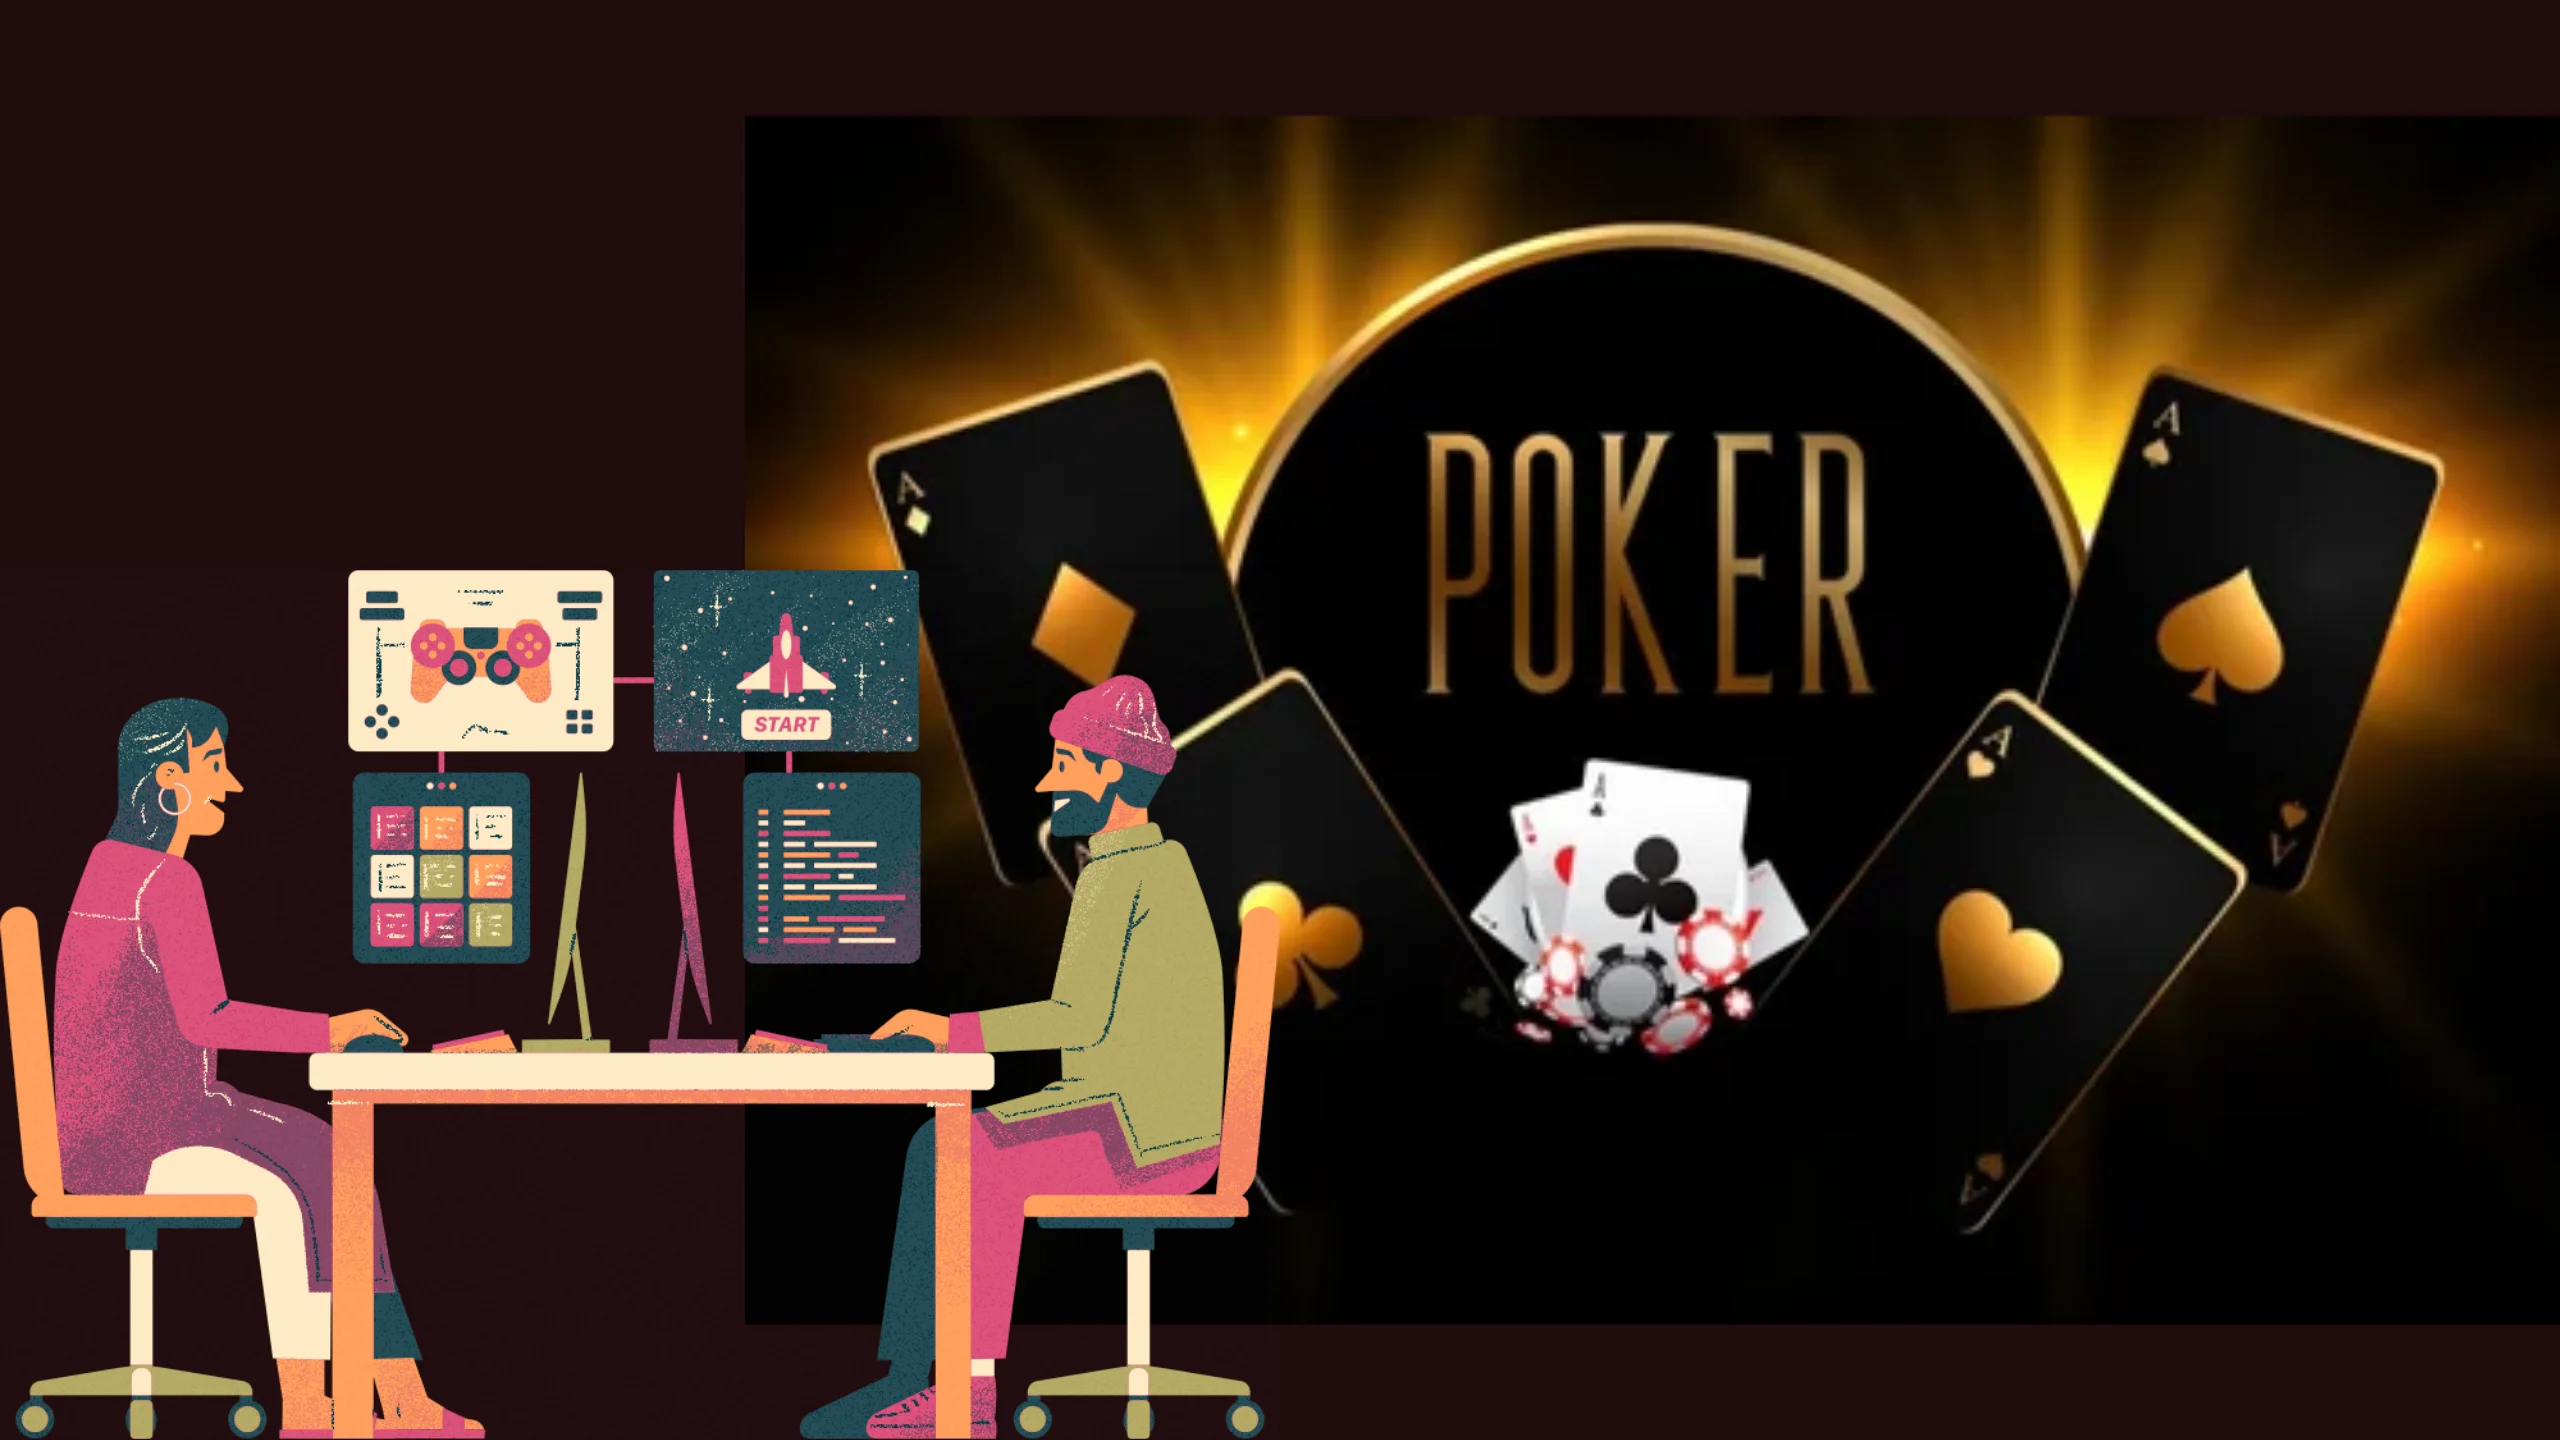 Icons representing benefits for poker game developers, including increased revenue, enhanced player engagement, and advanced gaming technologies.